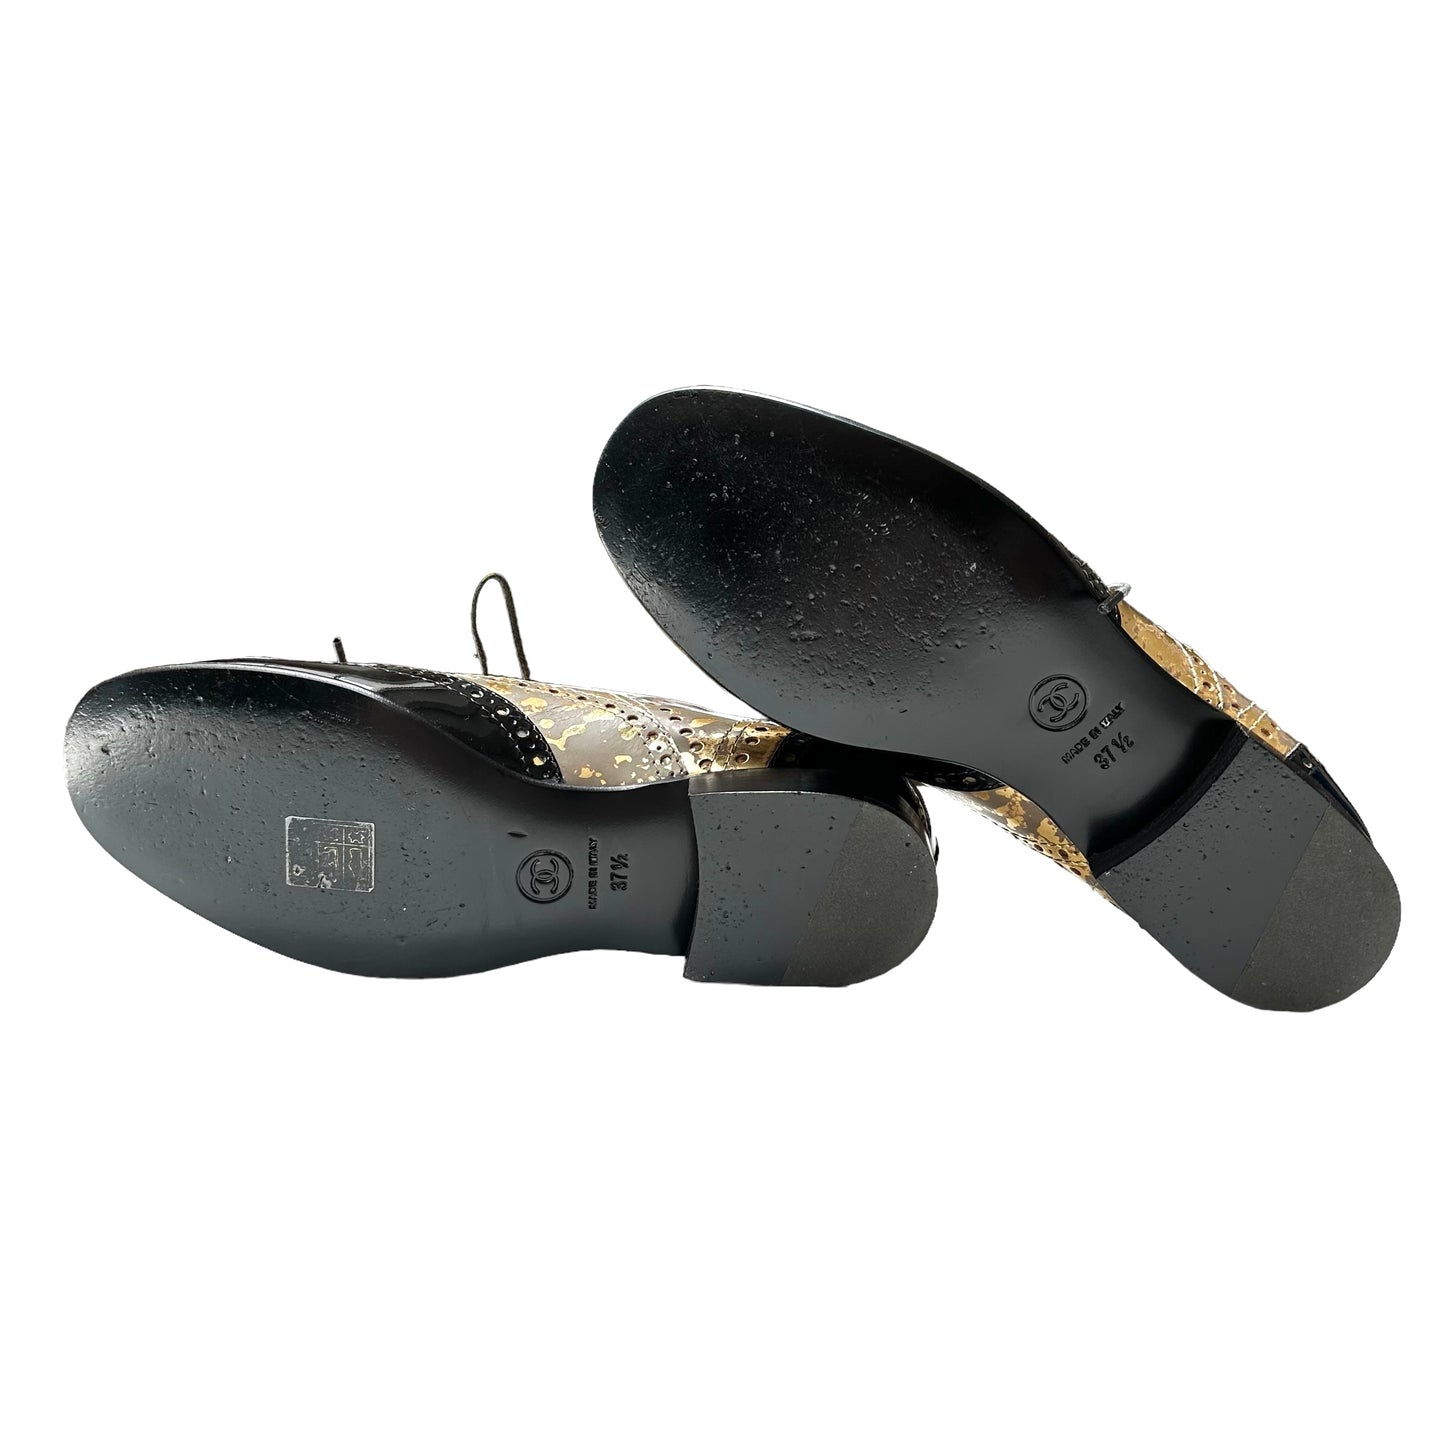 Black & Gold Loafers - 7.5